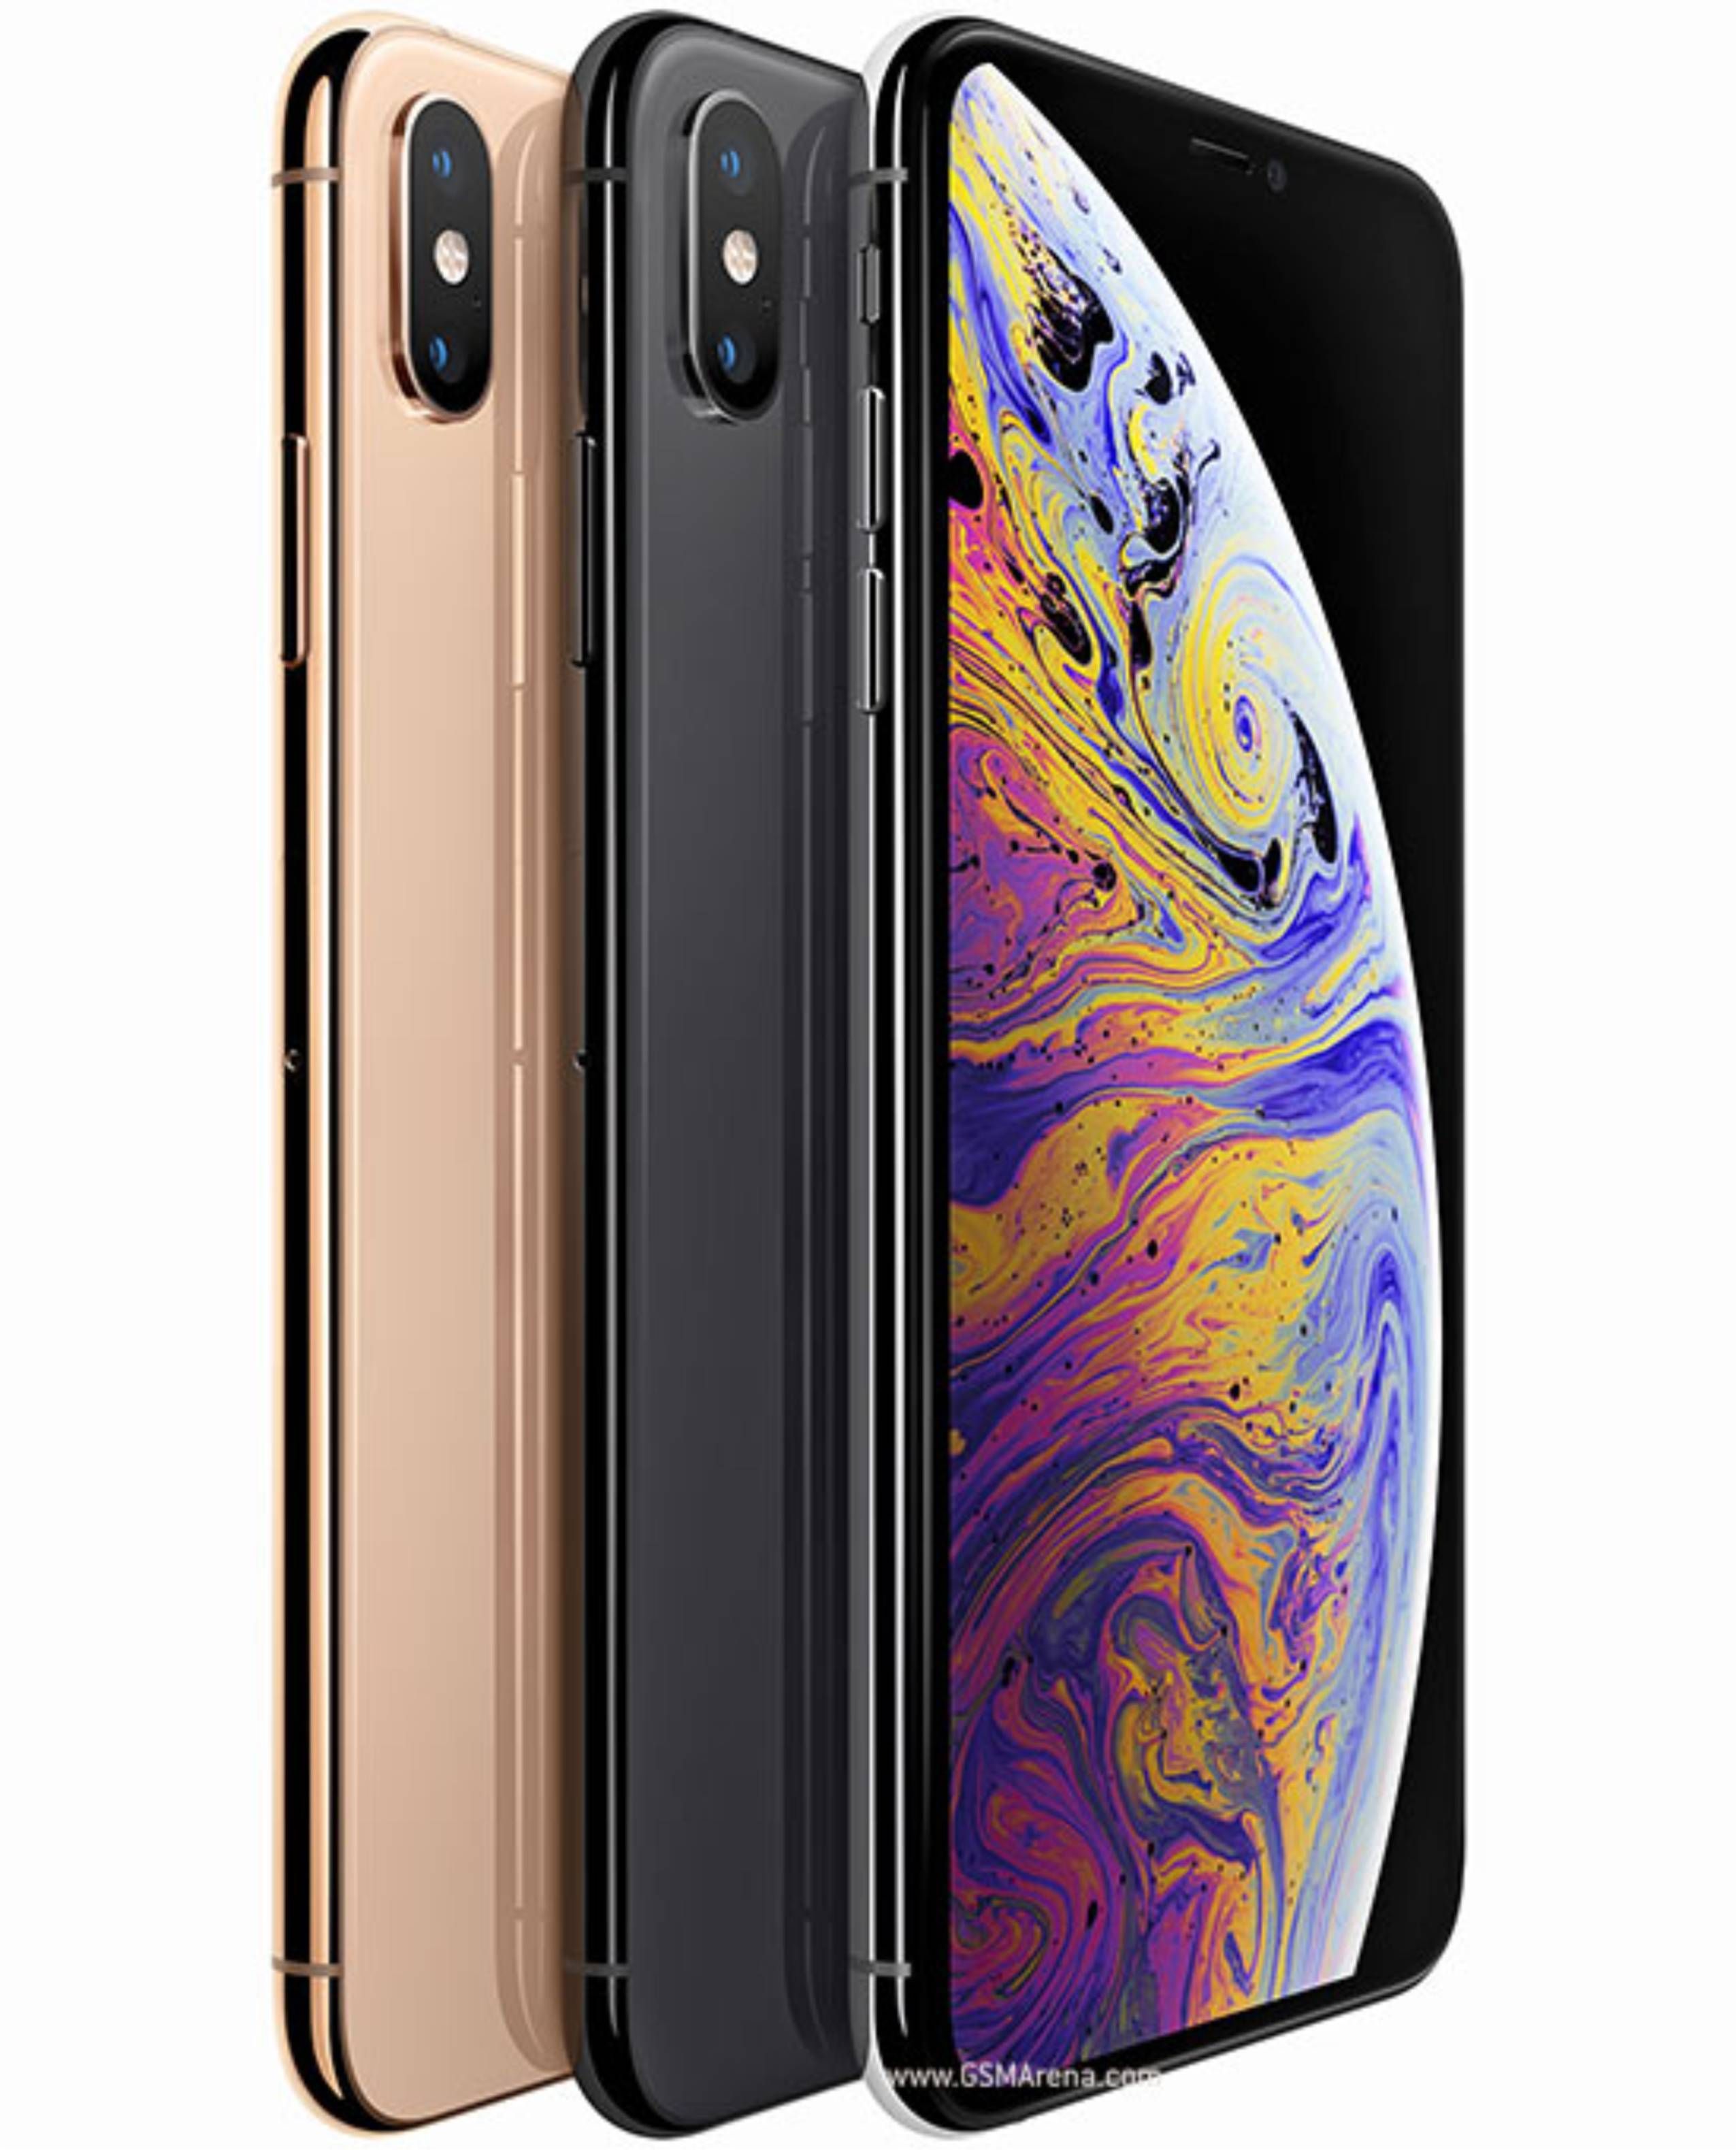 What is Apple iPhone XS Screen Replacement Cost in Kenya?